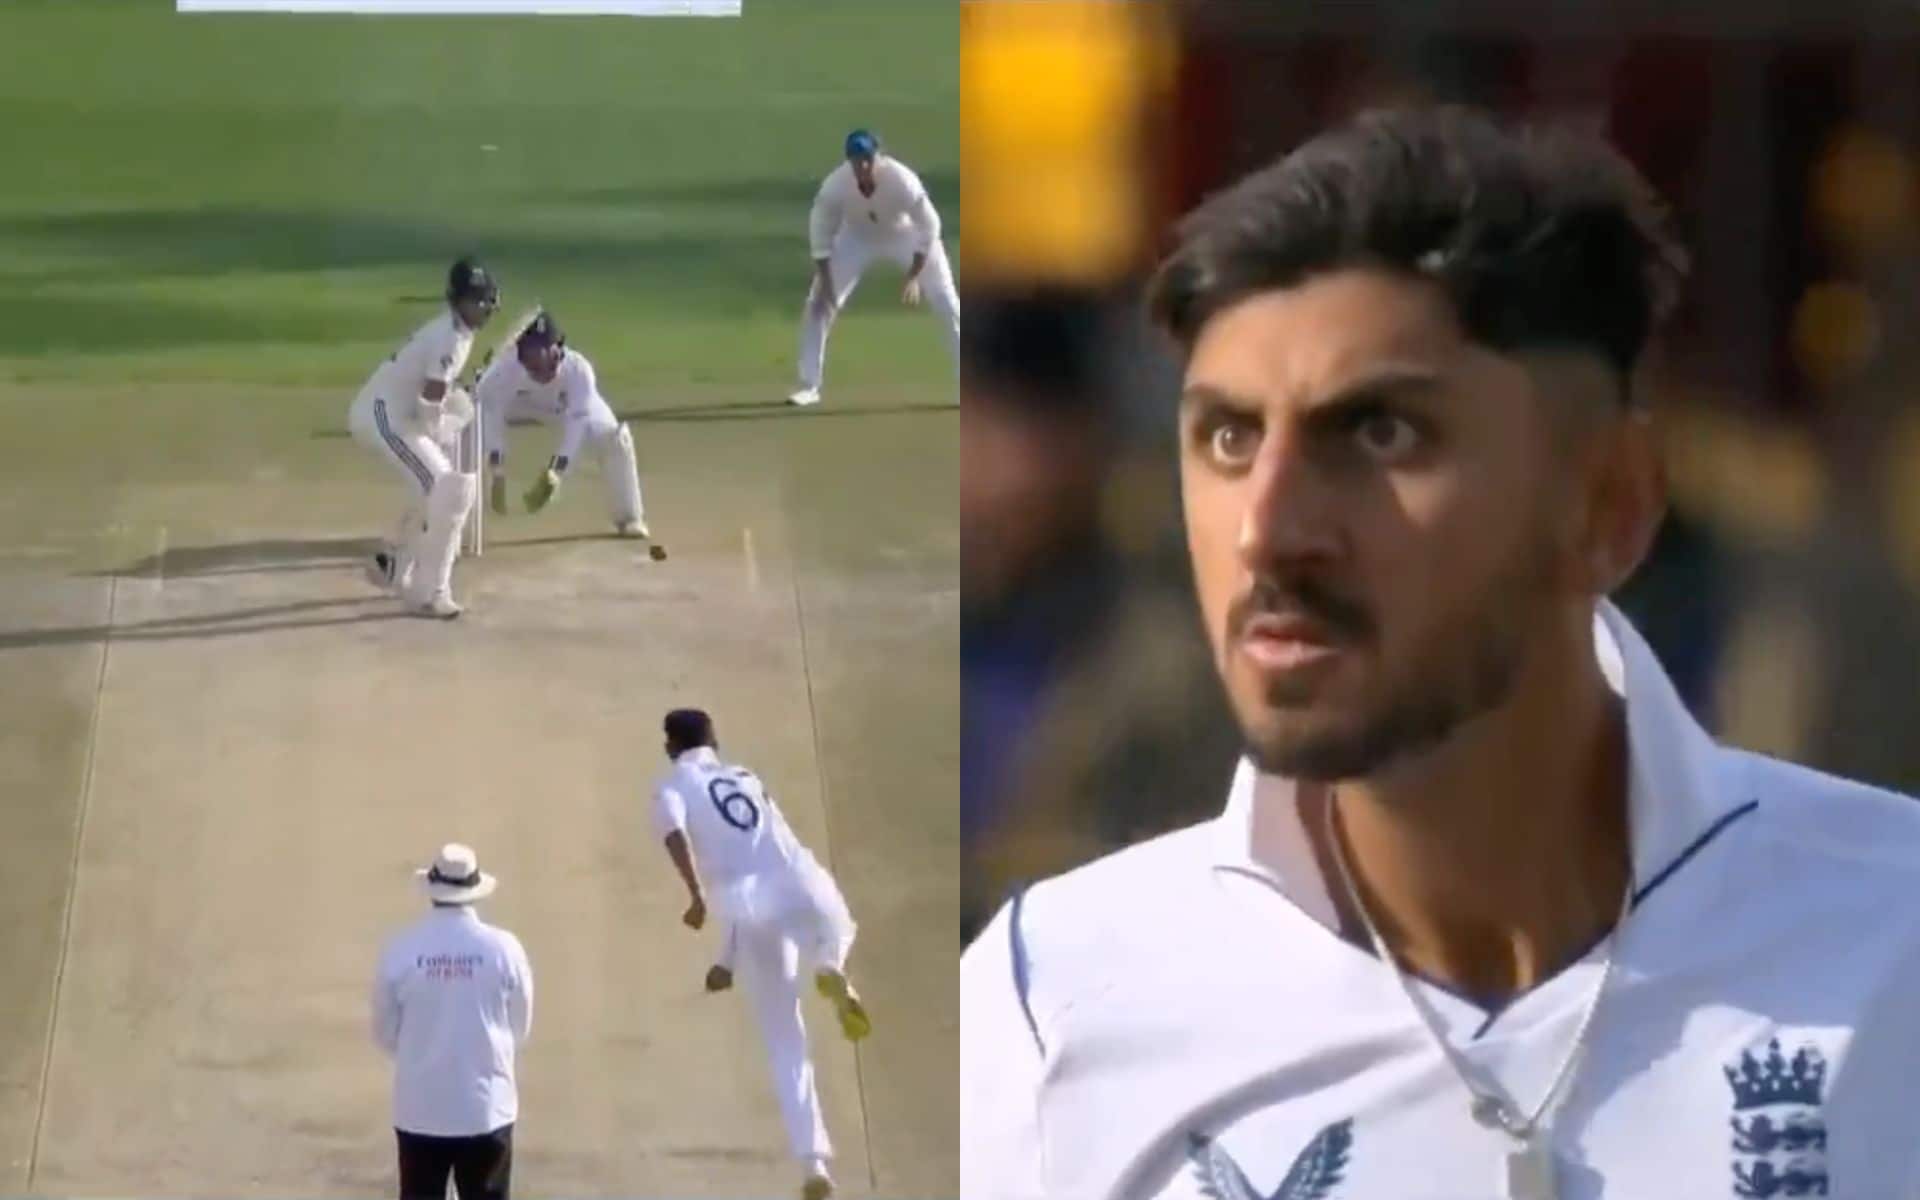 Bashir looking at Jaiswal angrily after wicket (X.com)